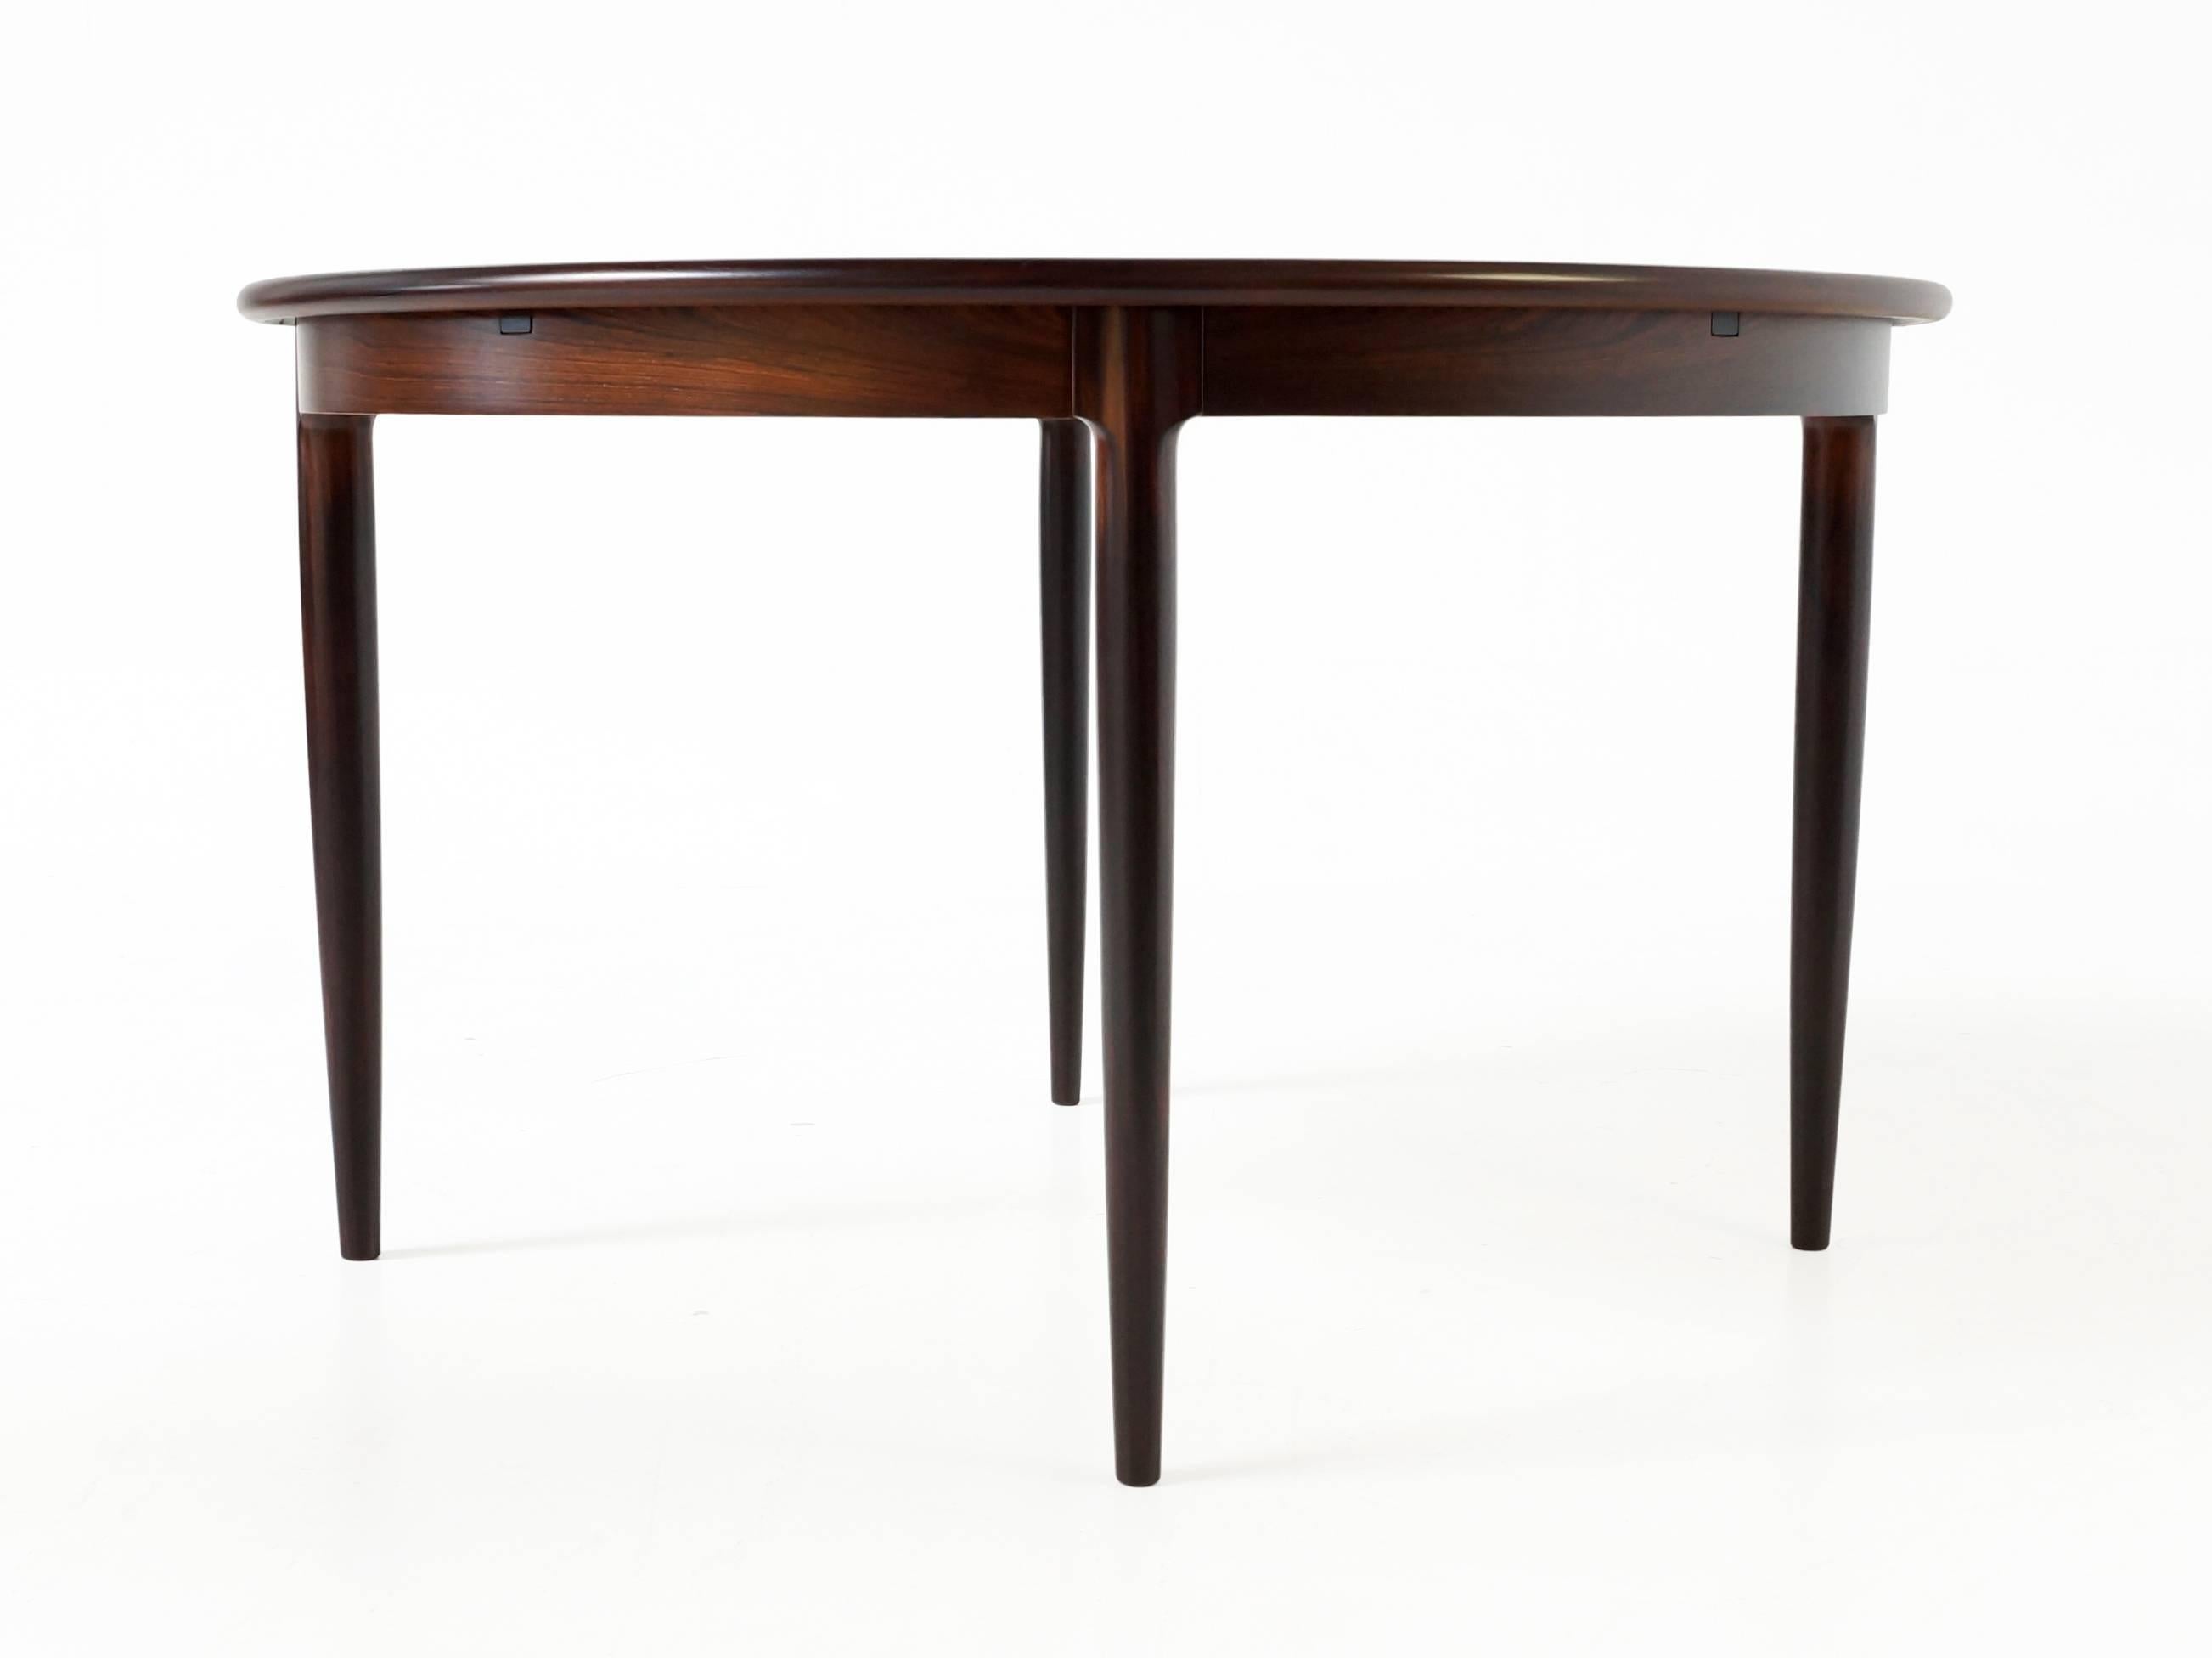 Round Danish extendable rosewood dining table designed Niels Otto Møller for J.L. Moller Models in the 1960s.

The table top features a very rich and warm wood grain and is is in very good condition. The tabletop is professional refinished with